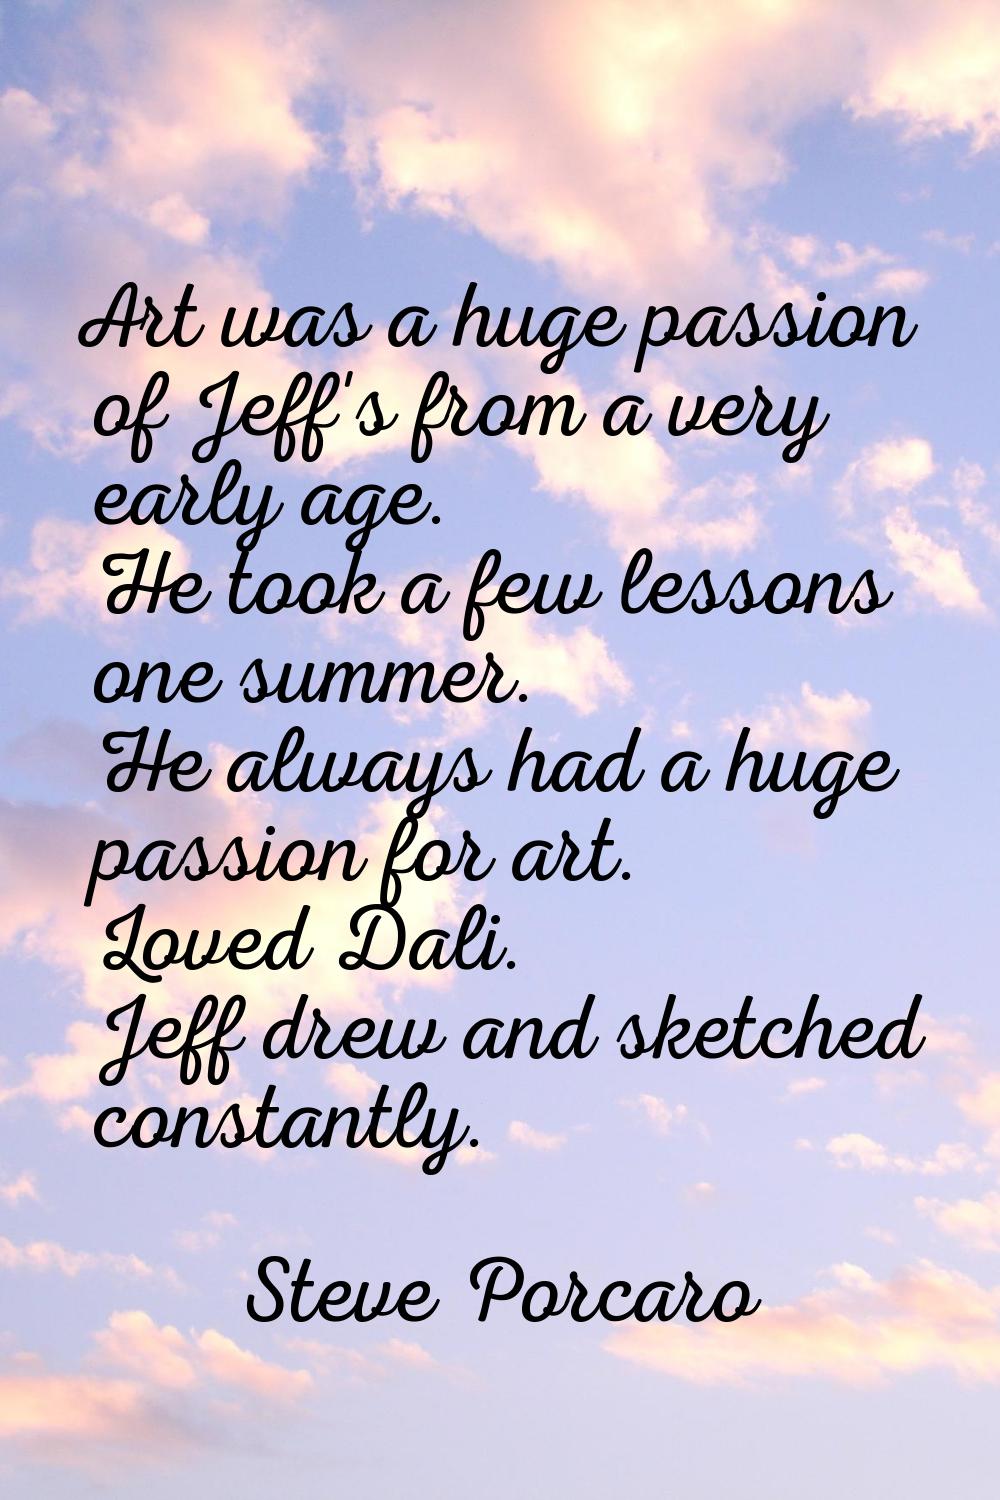 Art was a huge passion of Jeff's from a very early age. He took a few lessons one summer. He always